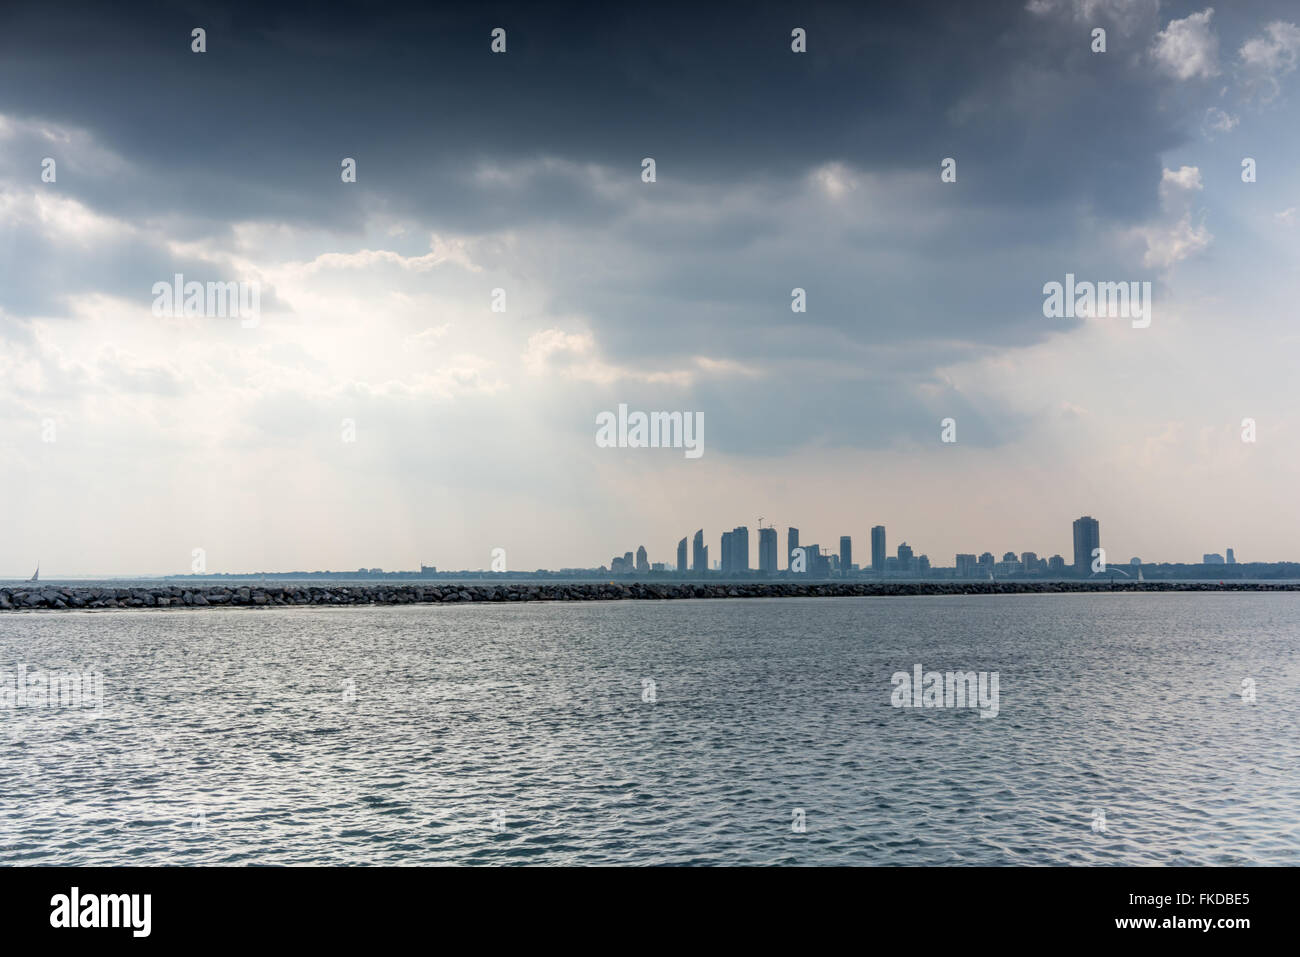 Distant view of city at the waterfront, Toronto, Ontario, Canada Stock Photo